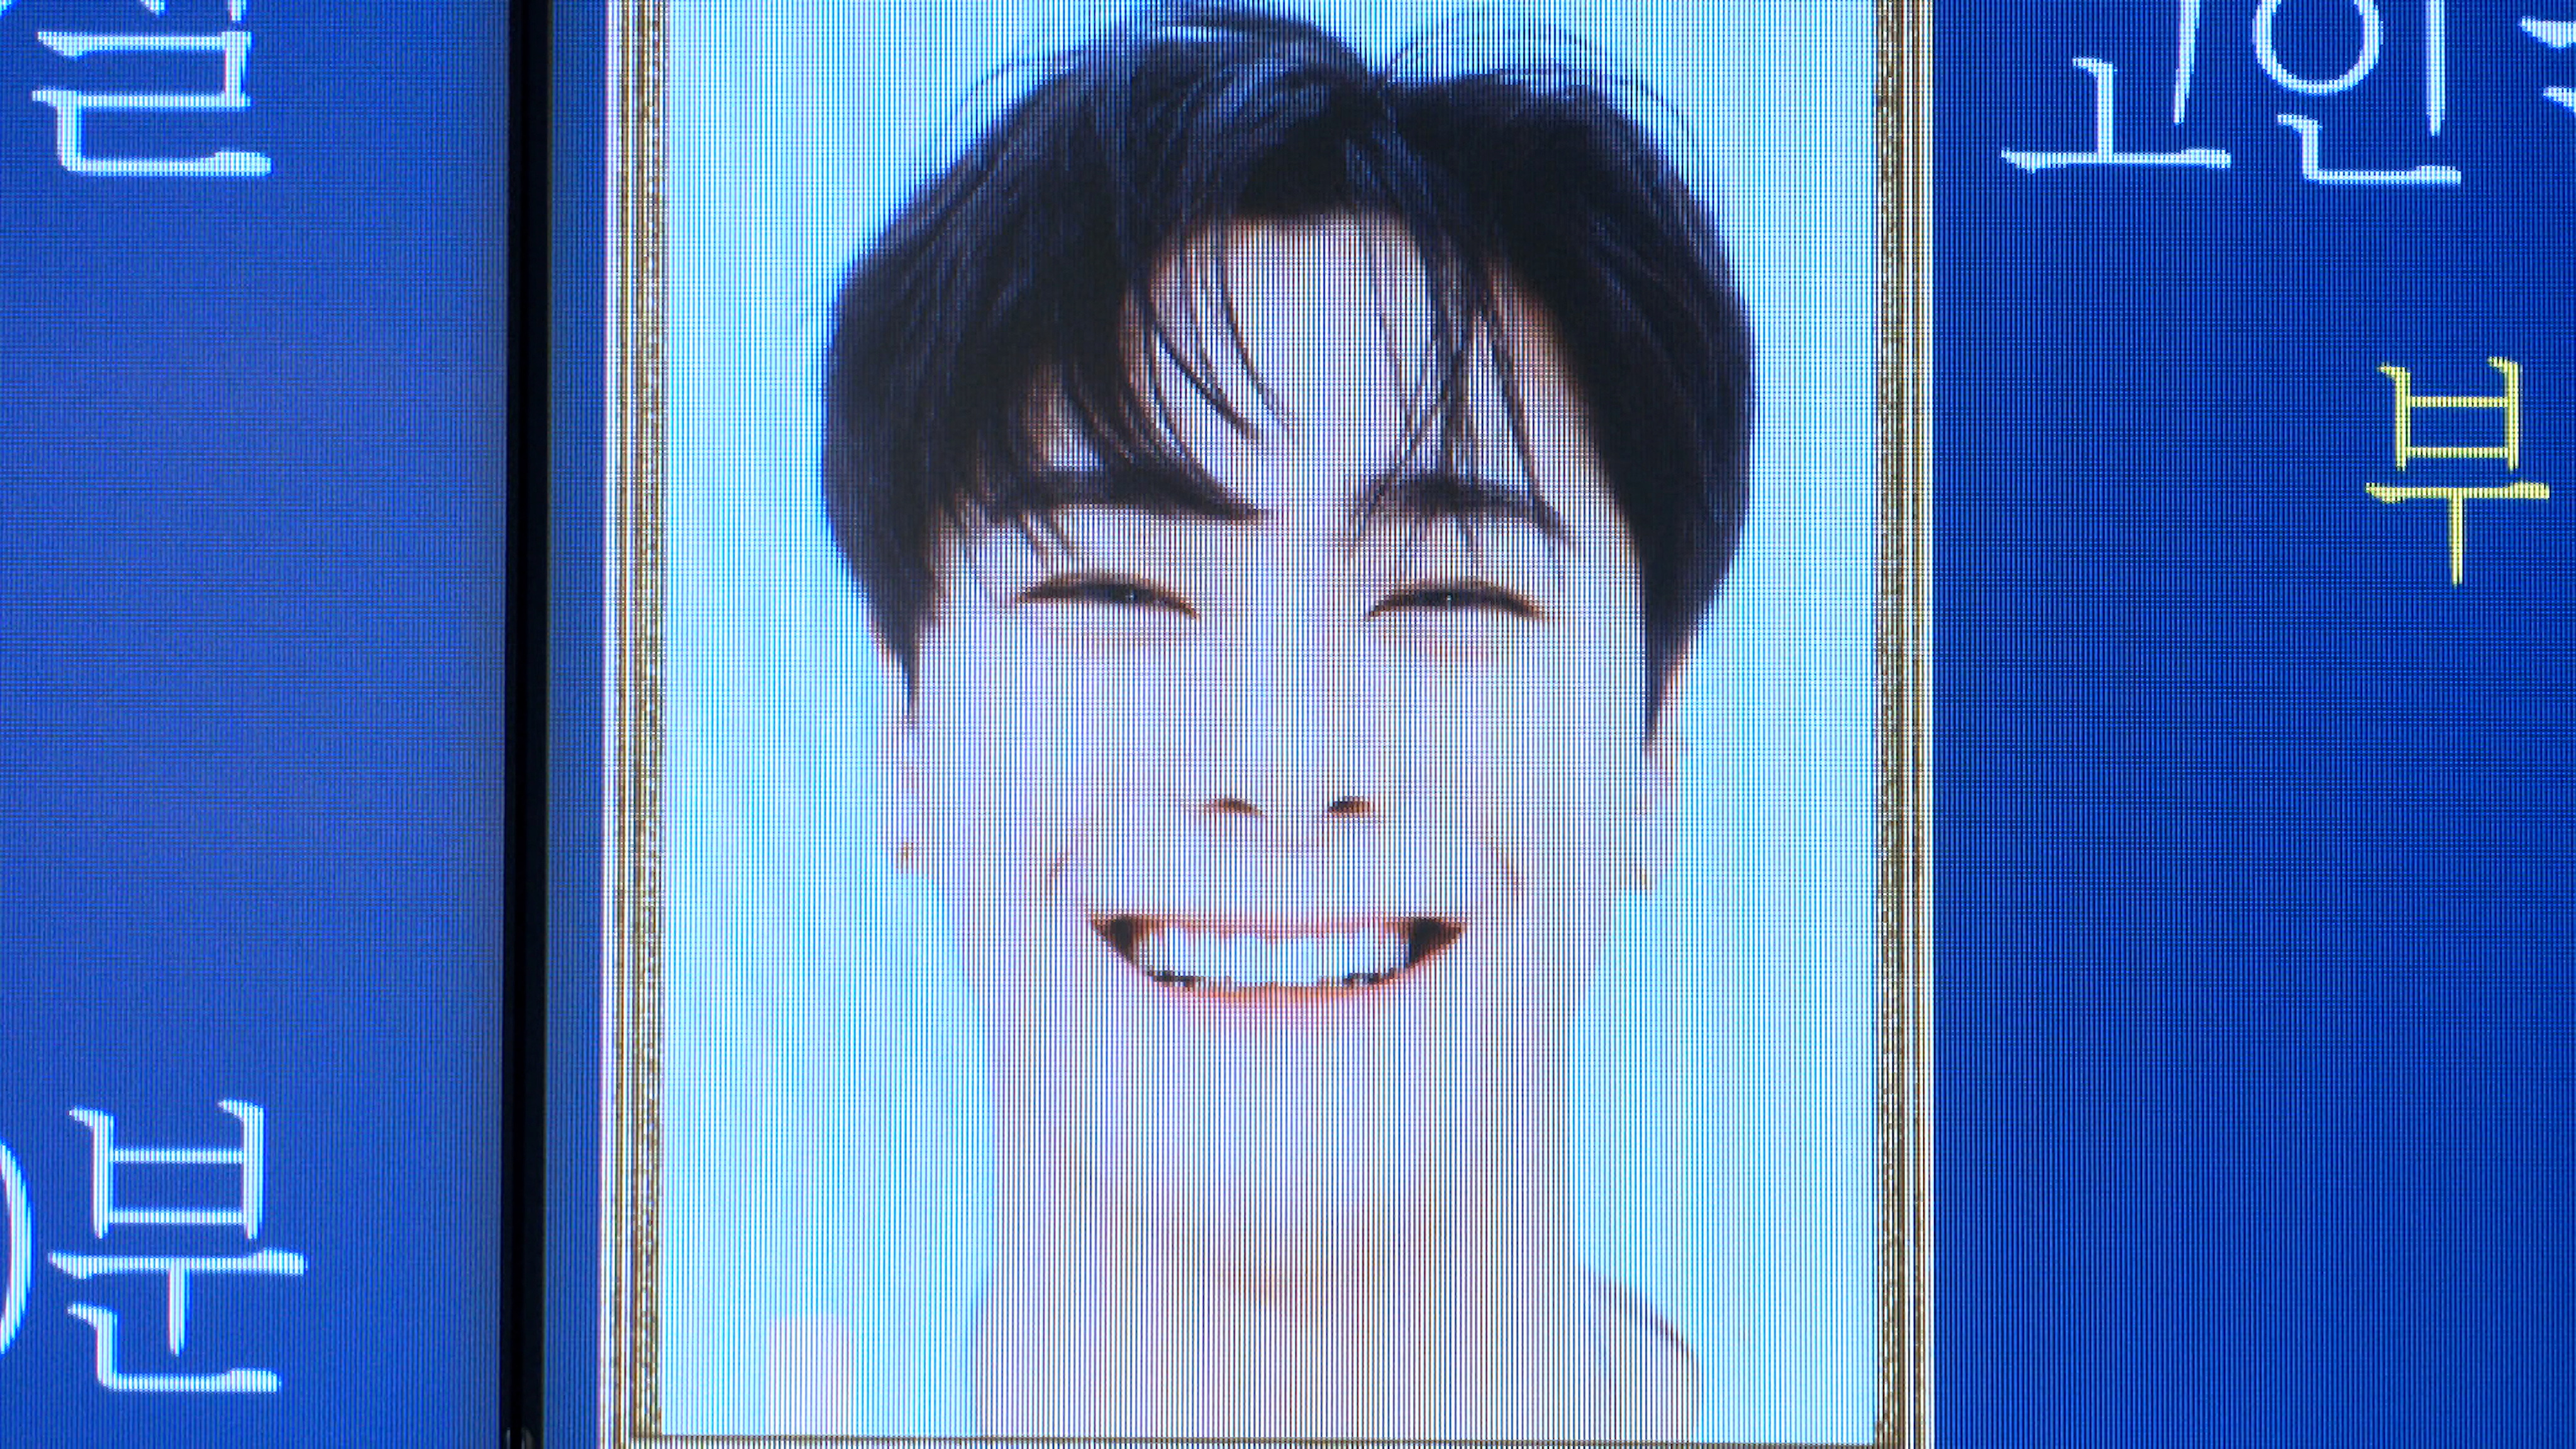 MOONBIN was found without vital signs in his home REUTERS/via Reuters TV/Daewoung Kim NO RESALES.  DO NOT ARCHIVE